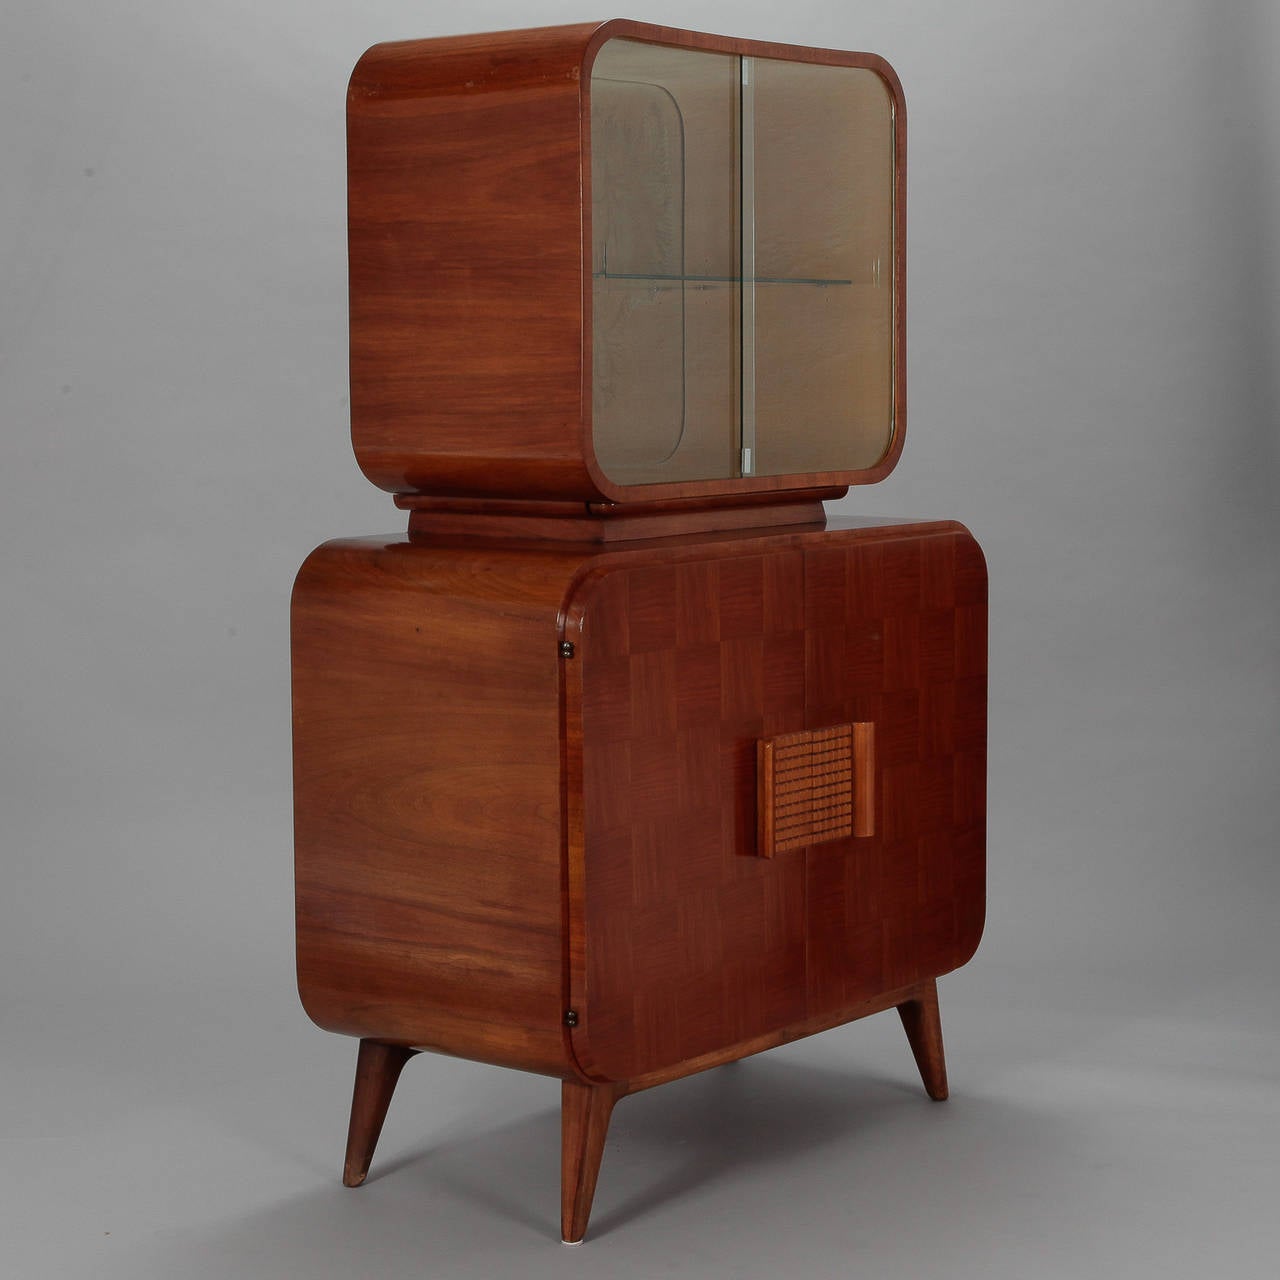 Circa 1944 bar cabinet or vitrine designed by Jindrich Halabala and manufactured by Czech Republic company UP Zavody. Checkerboard style veneer surface, top compartment has sliding glass doors and single glass shelf, bottom compartment has two